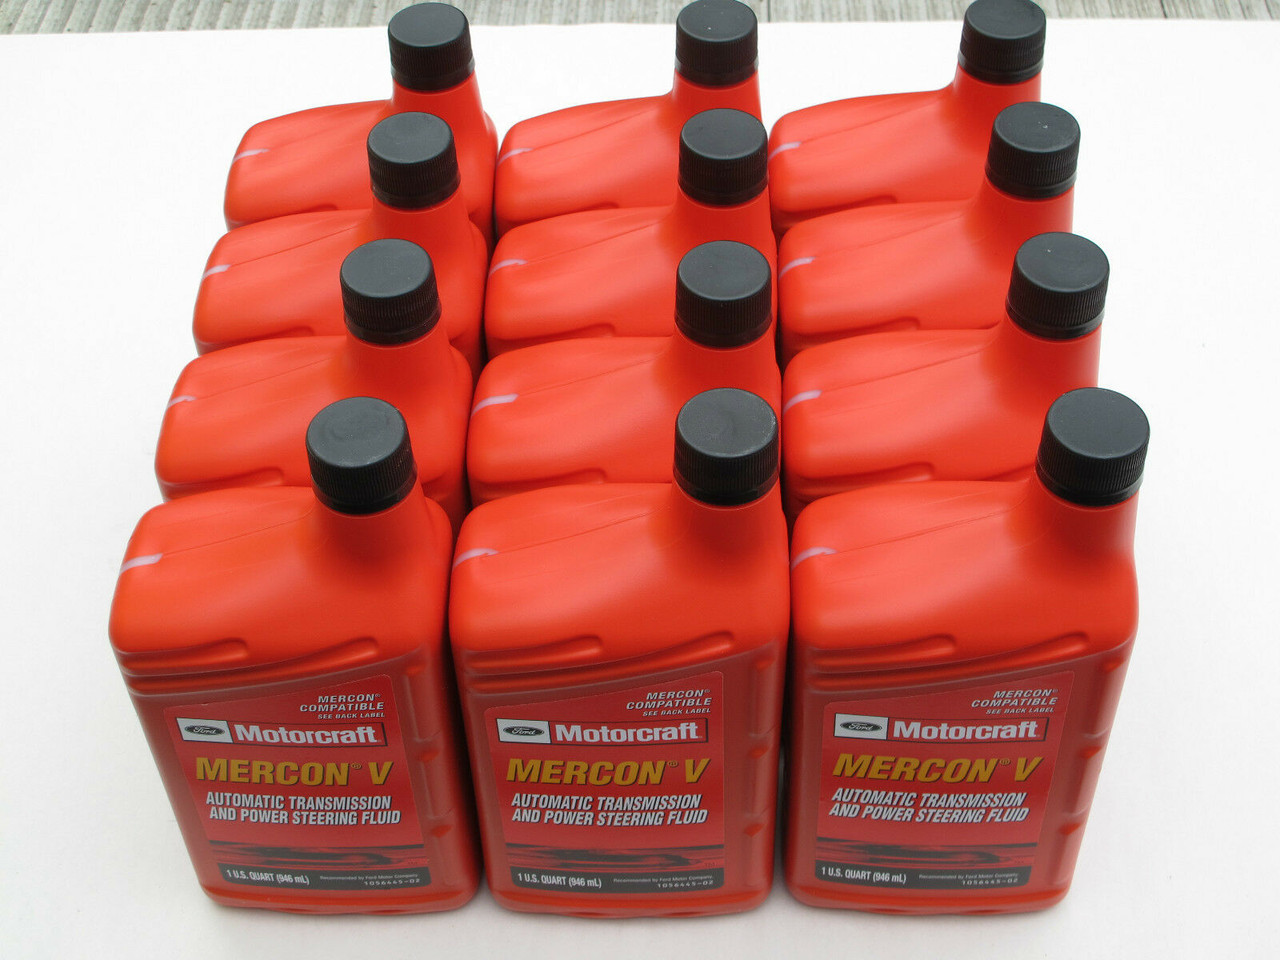 Ford Mercon LV Automatic Transmission Fluid And Power Steering